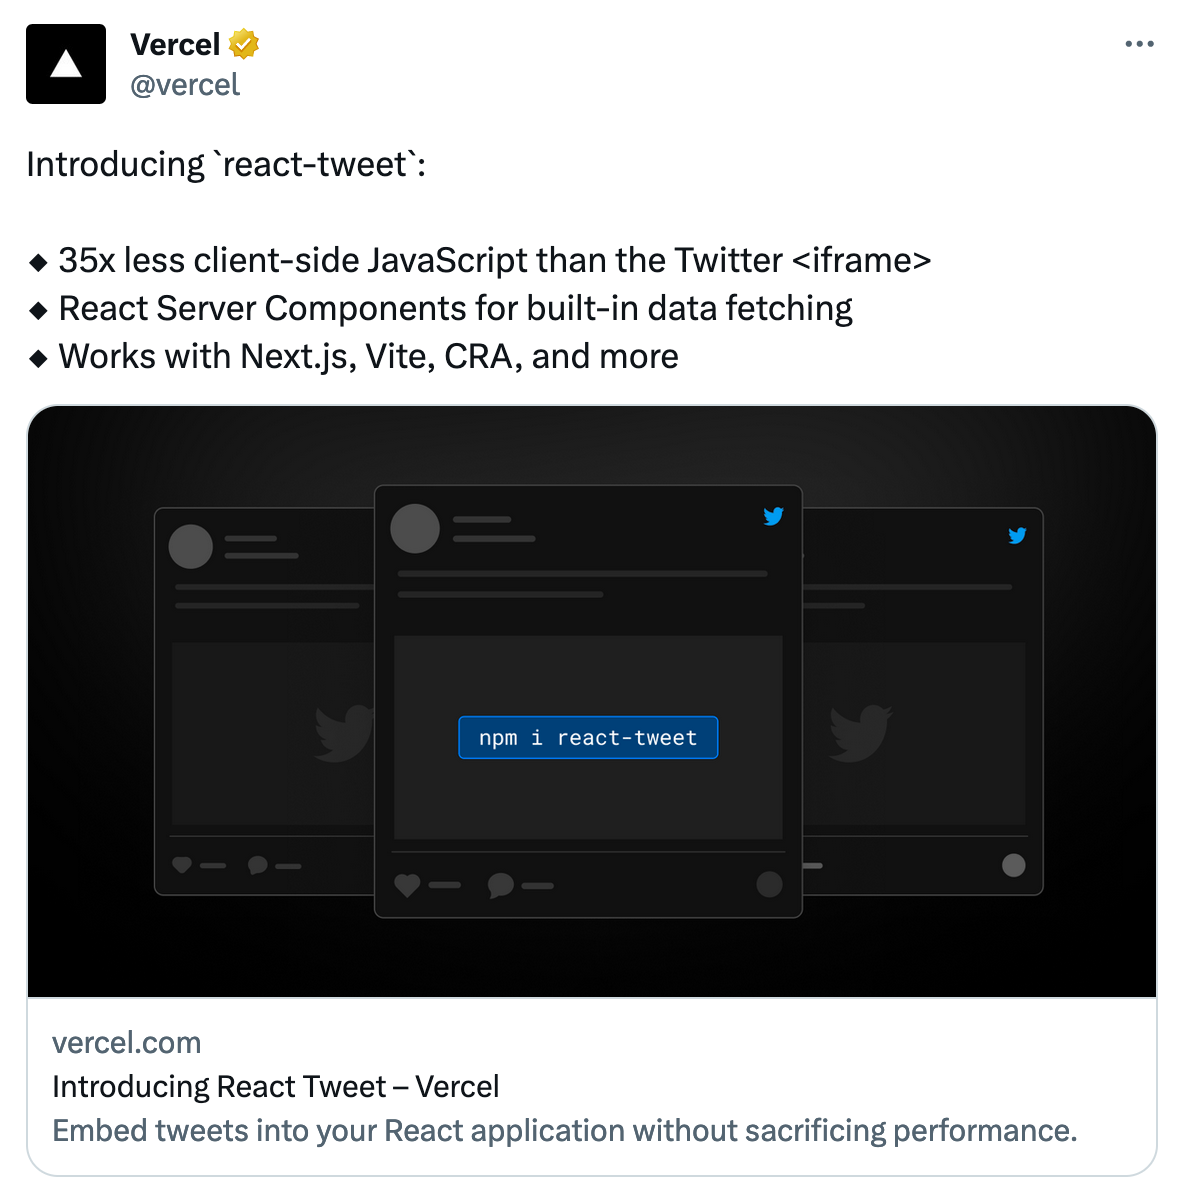 Vercel tweet: Introducing `react-tweet`:  ◆ 35x less client-side JavaScript than the Twitter <iframe> ◆ React Server Components for built-in data fetching ◆ Works with Next.js, Vite, CRA, and more